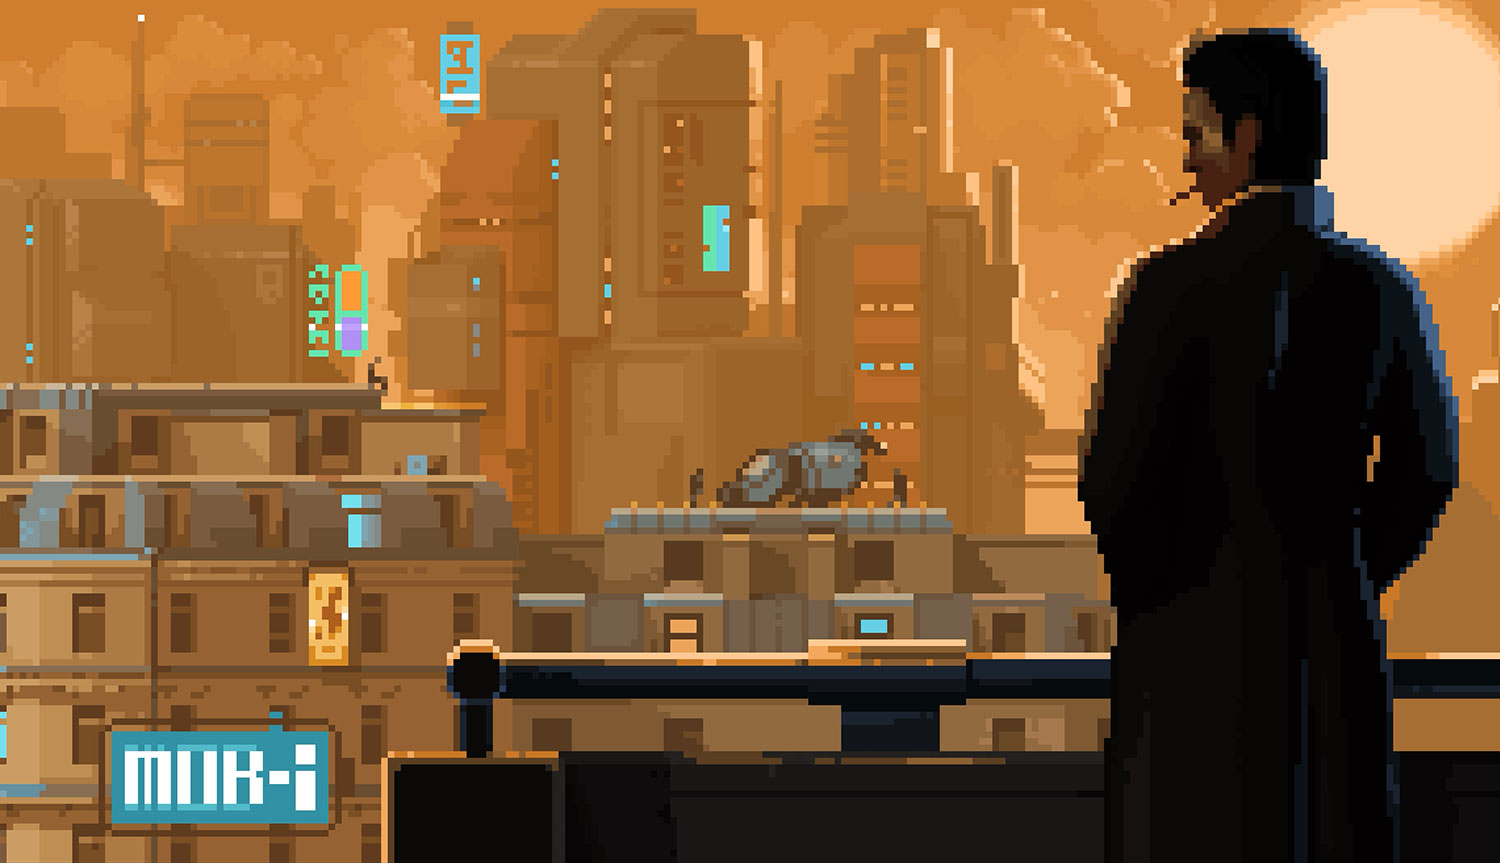 Pixel art futuristic noir world from the video game of Lacuna with a man silhouetted looking out over the city